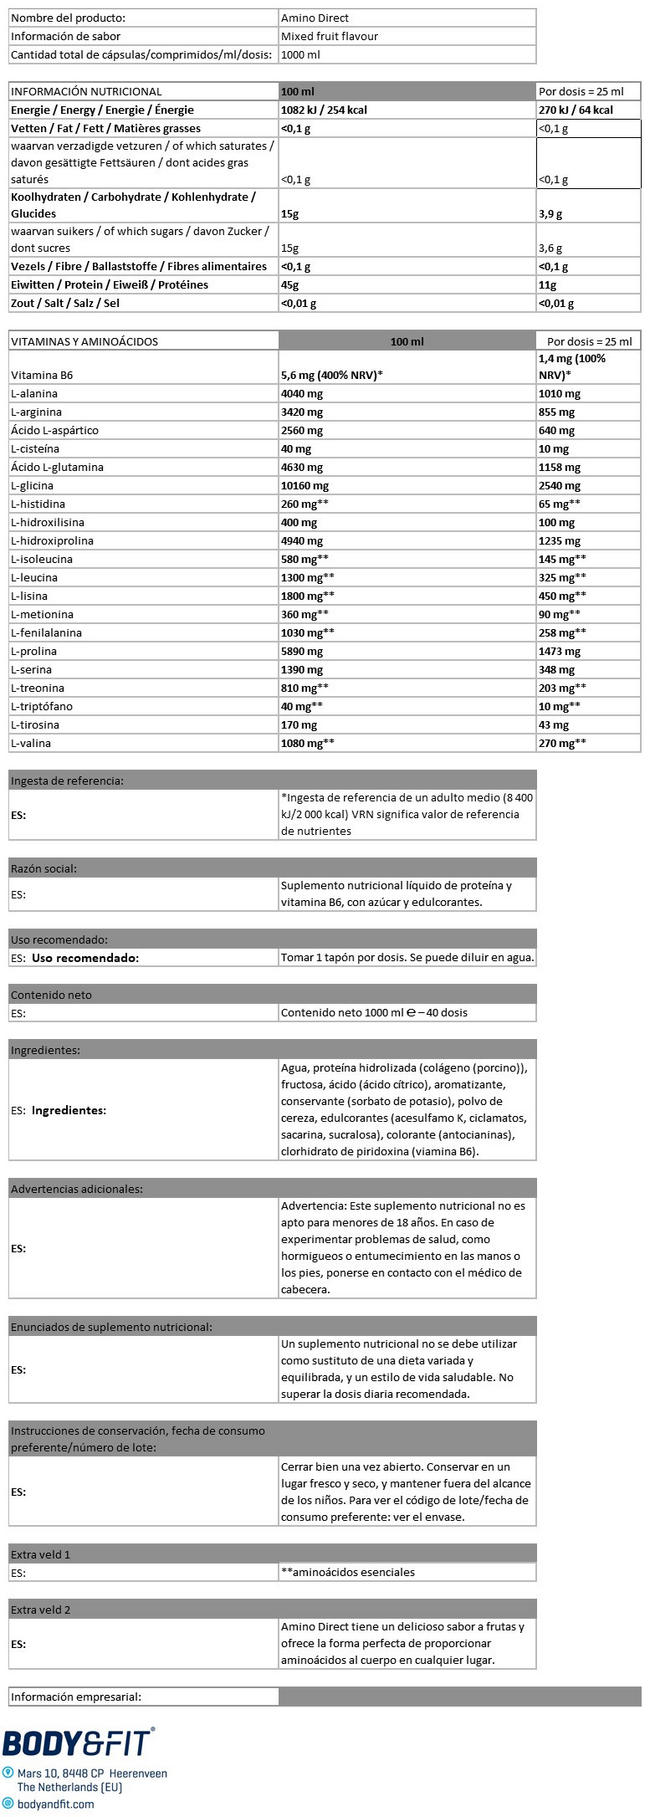 Amino Direct Nutritional Information 1